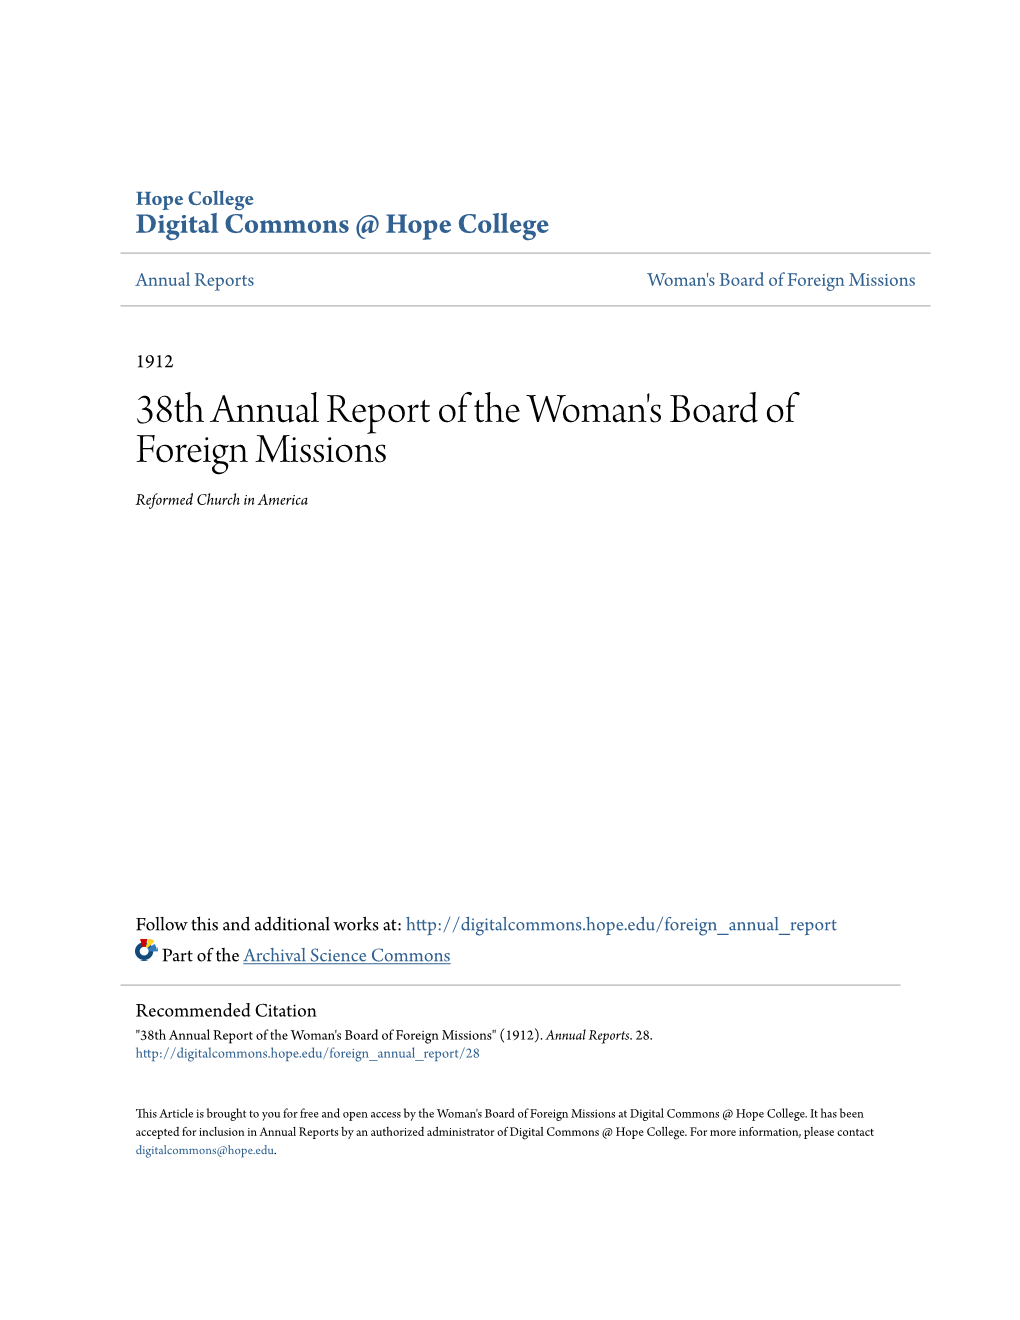 38Th Annual Report of the Woman's Board of Foreign Missions